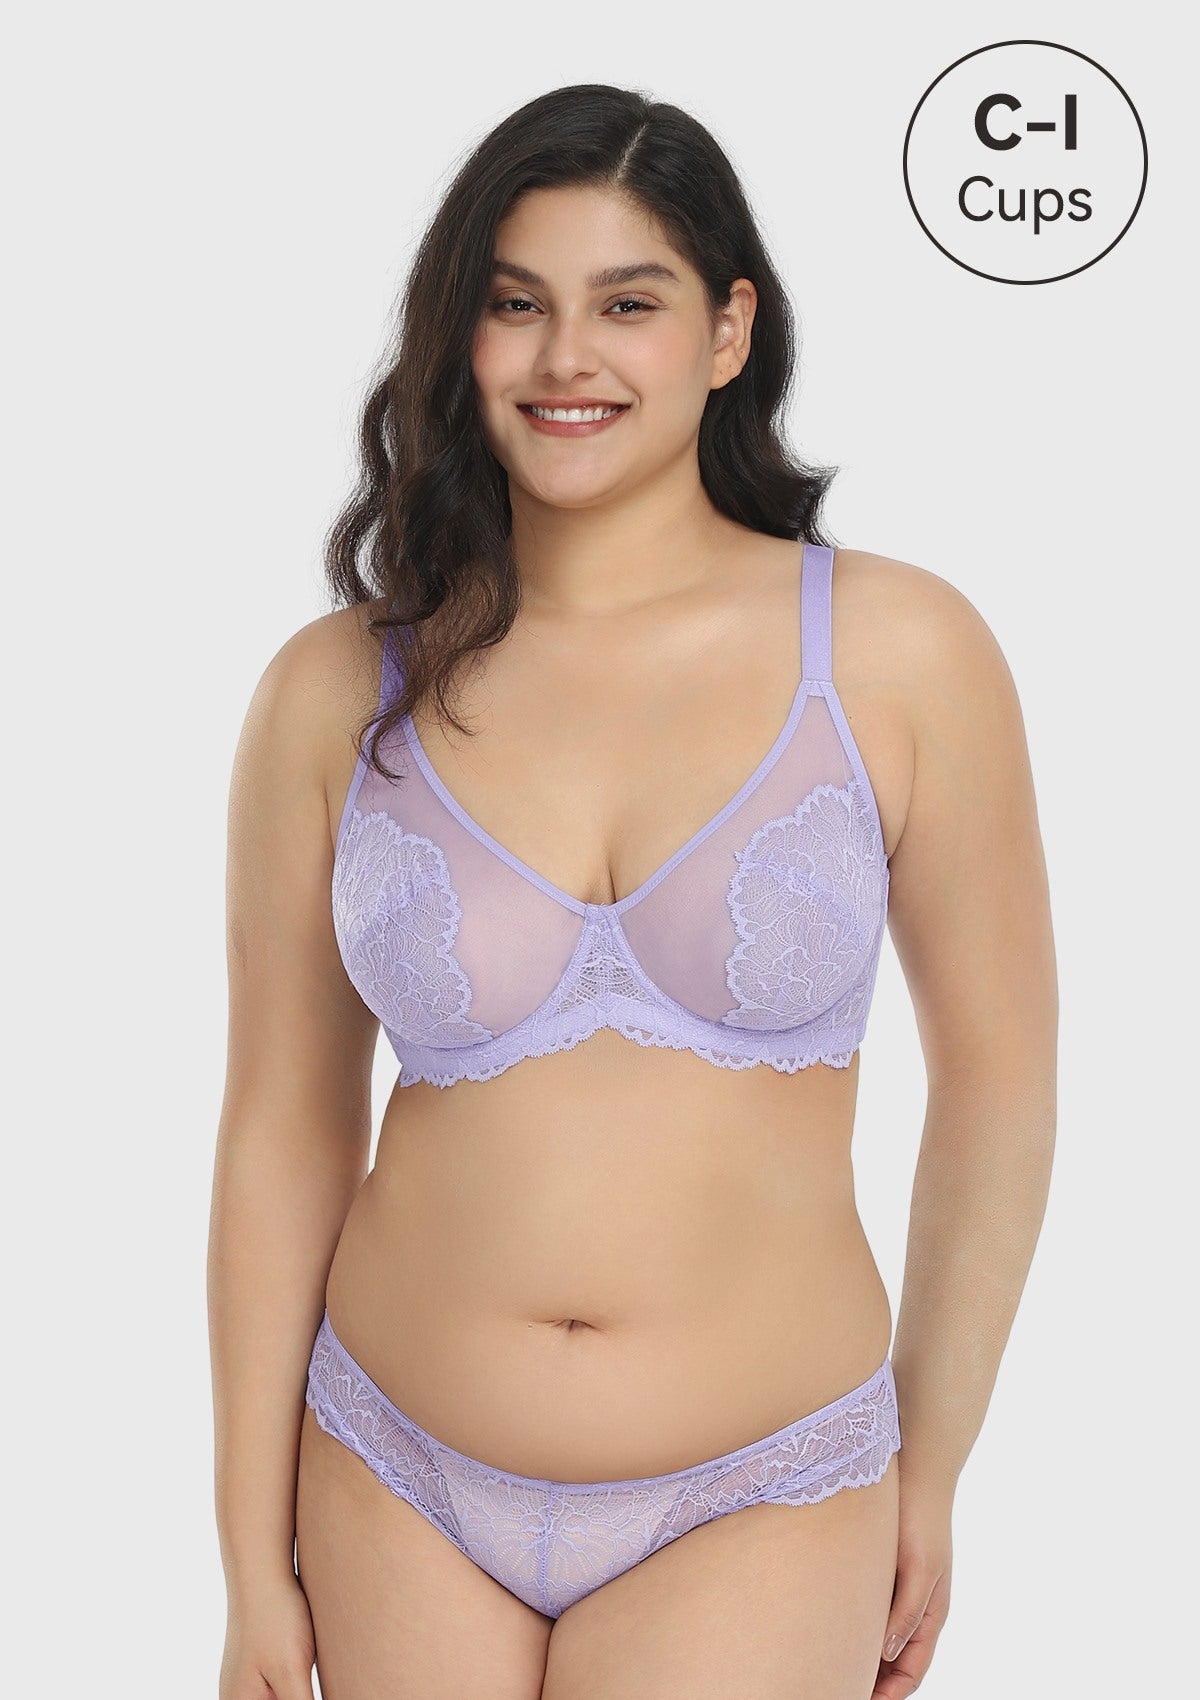 HSIA Blossom Transparent Lace Bra: Plus Size Wired Back Smoothing Bra - Light Purple / 40 / DD/E